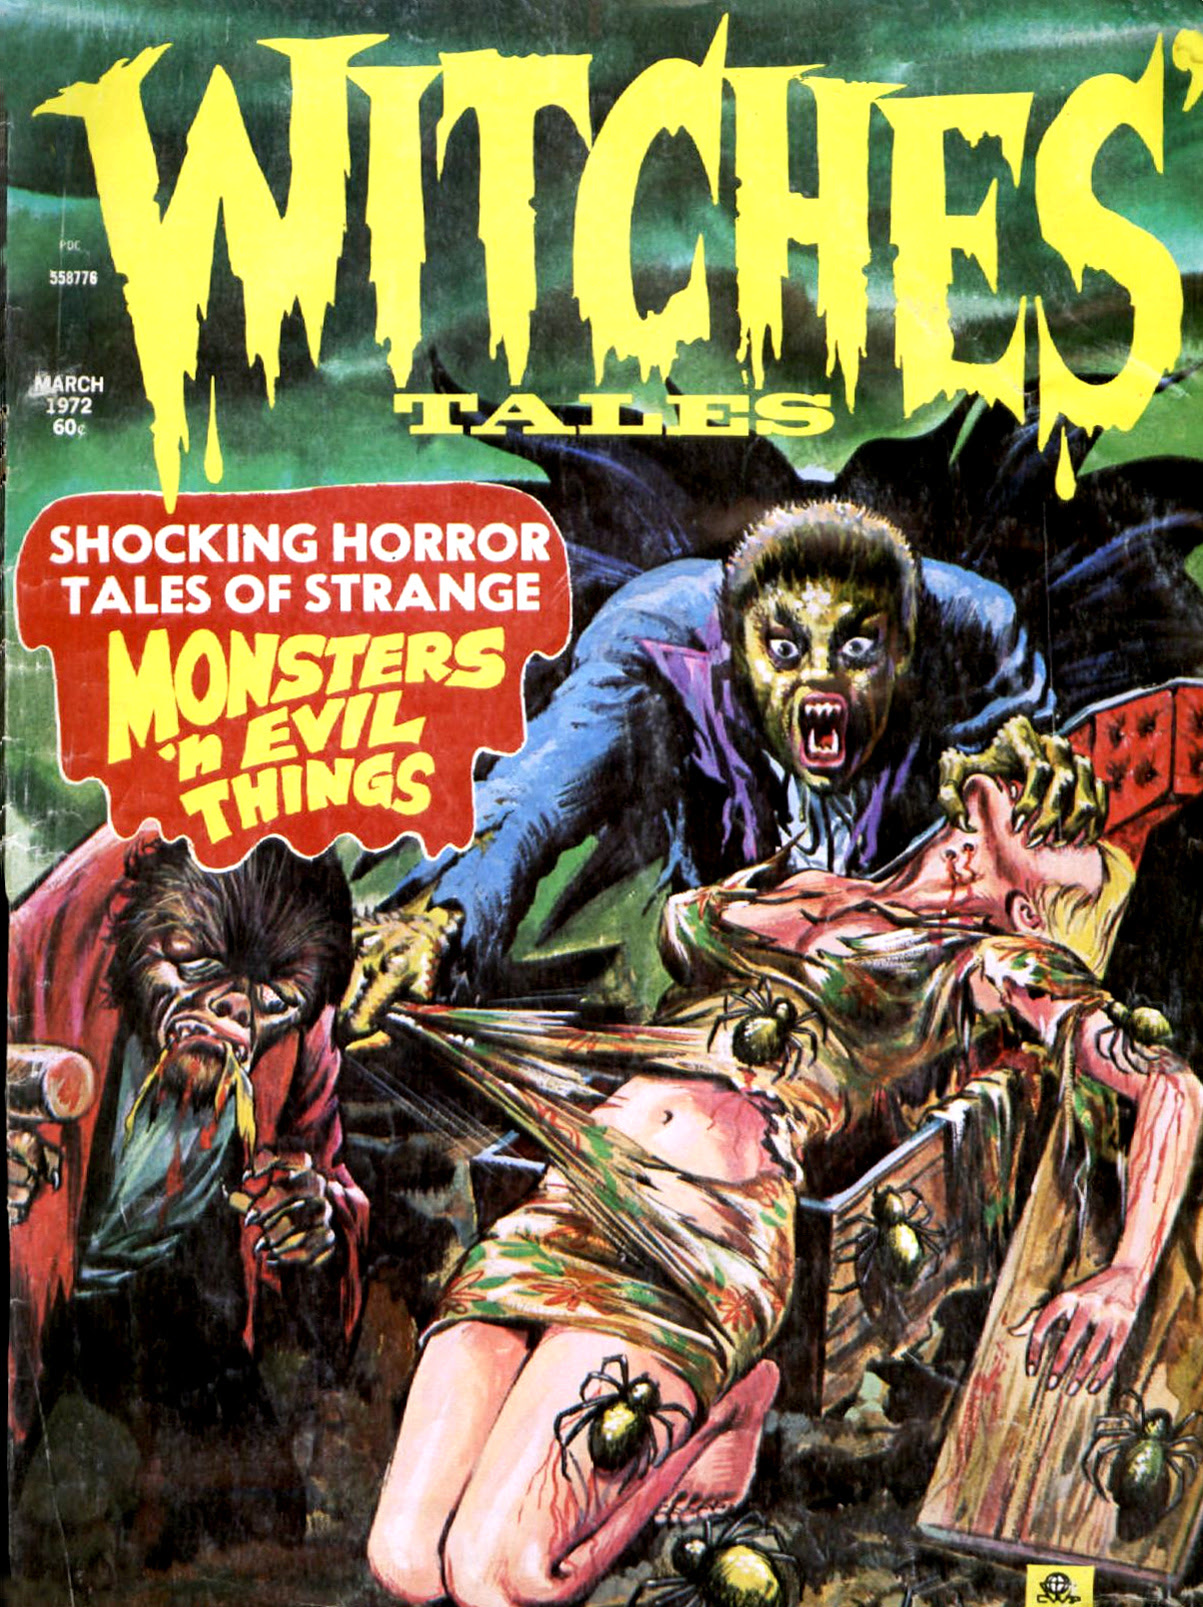 Witches' Tales Vol. 4 #2 (Eerie Publications 1972)